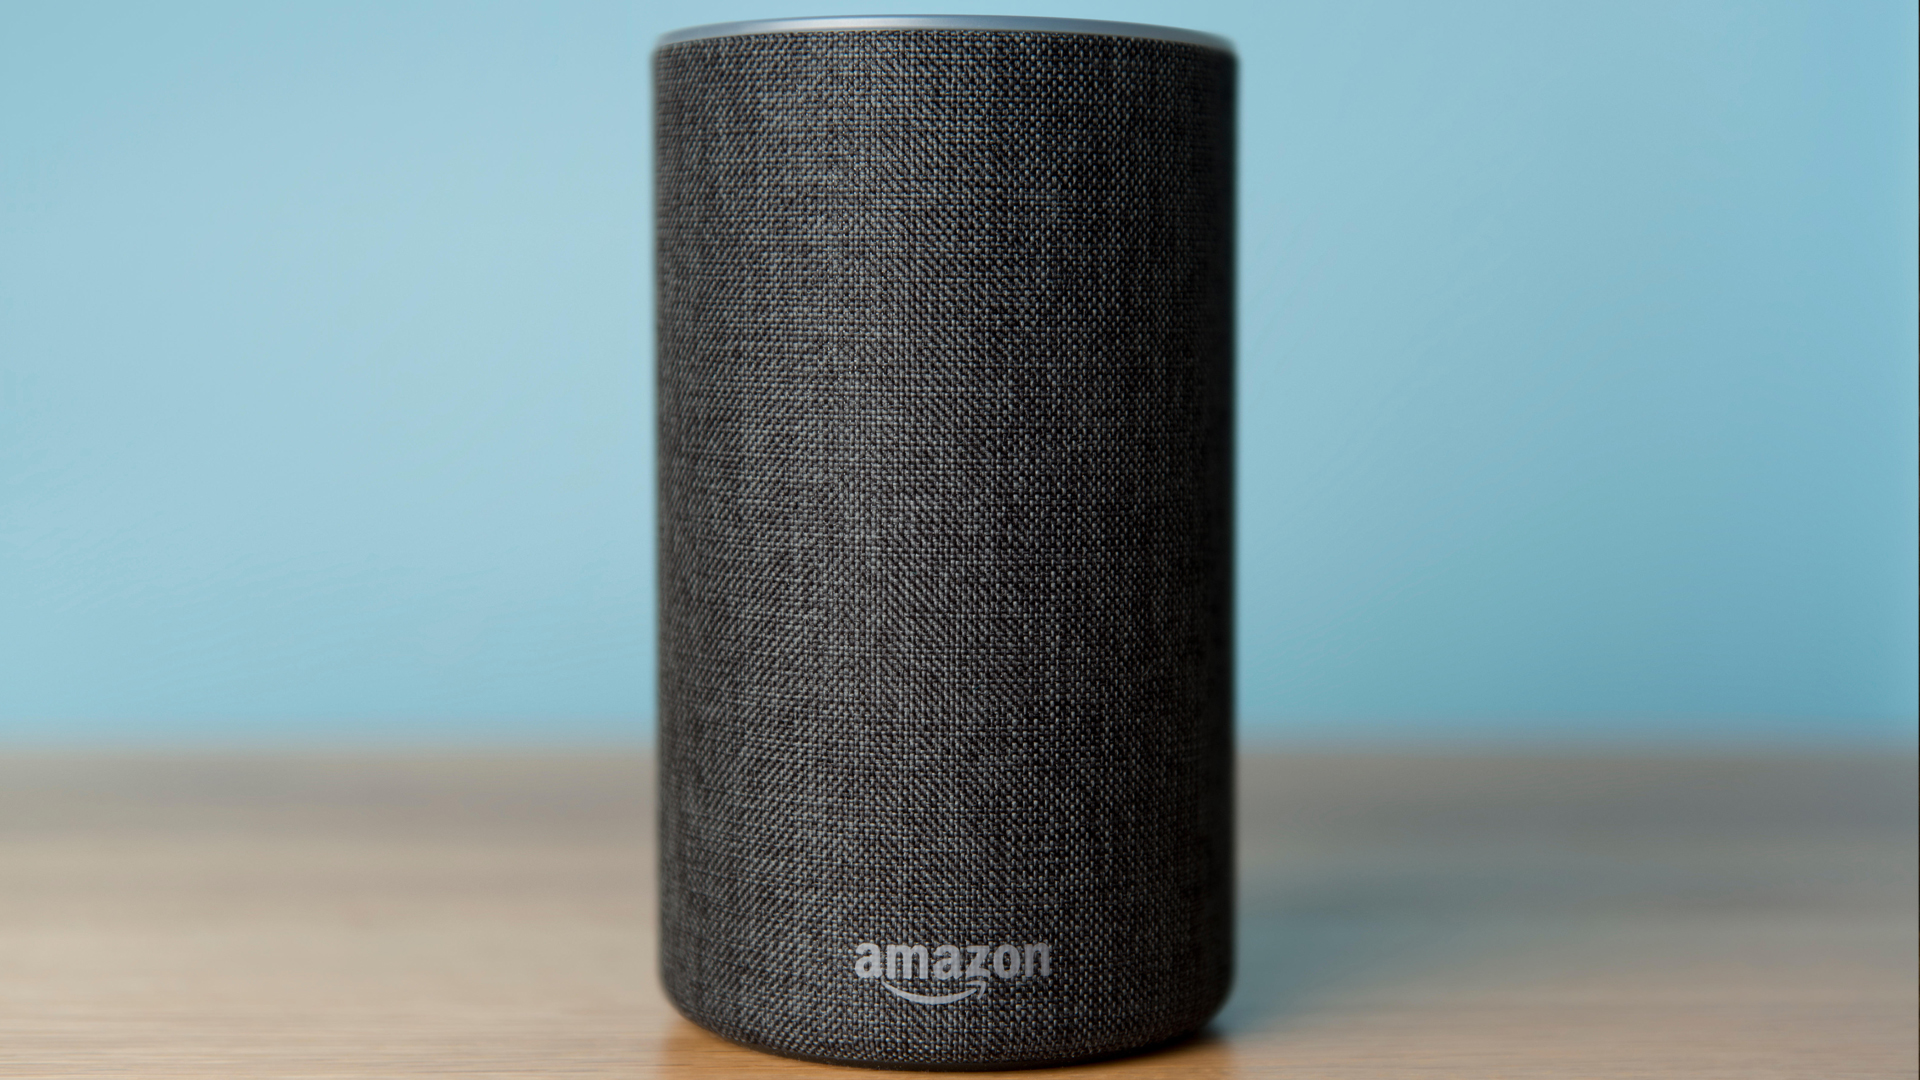 Smart speaker owners: MPs investigate whether fraudsters and perverts can spy on them through Amazon Alexa